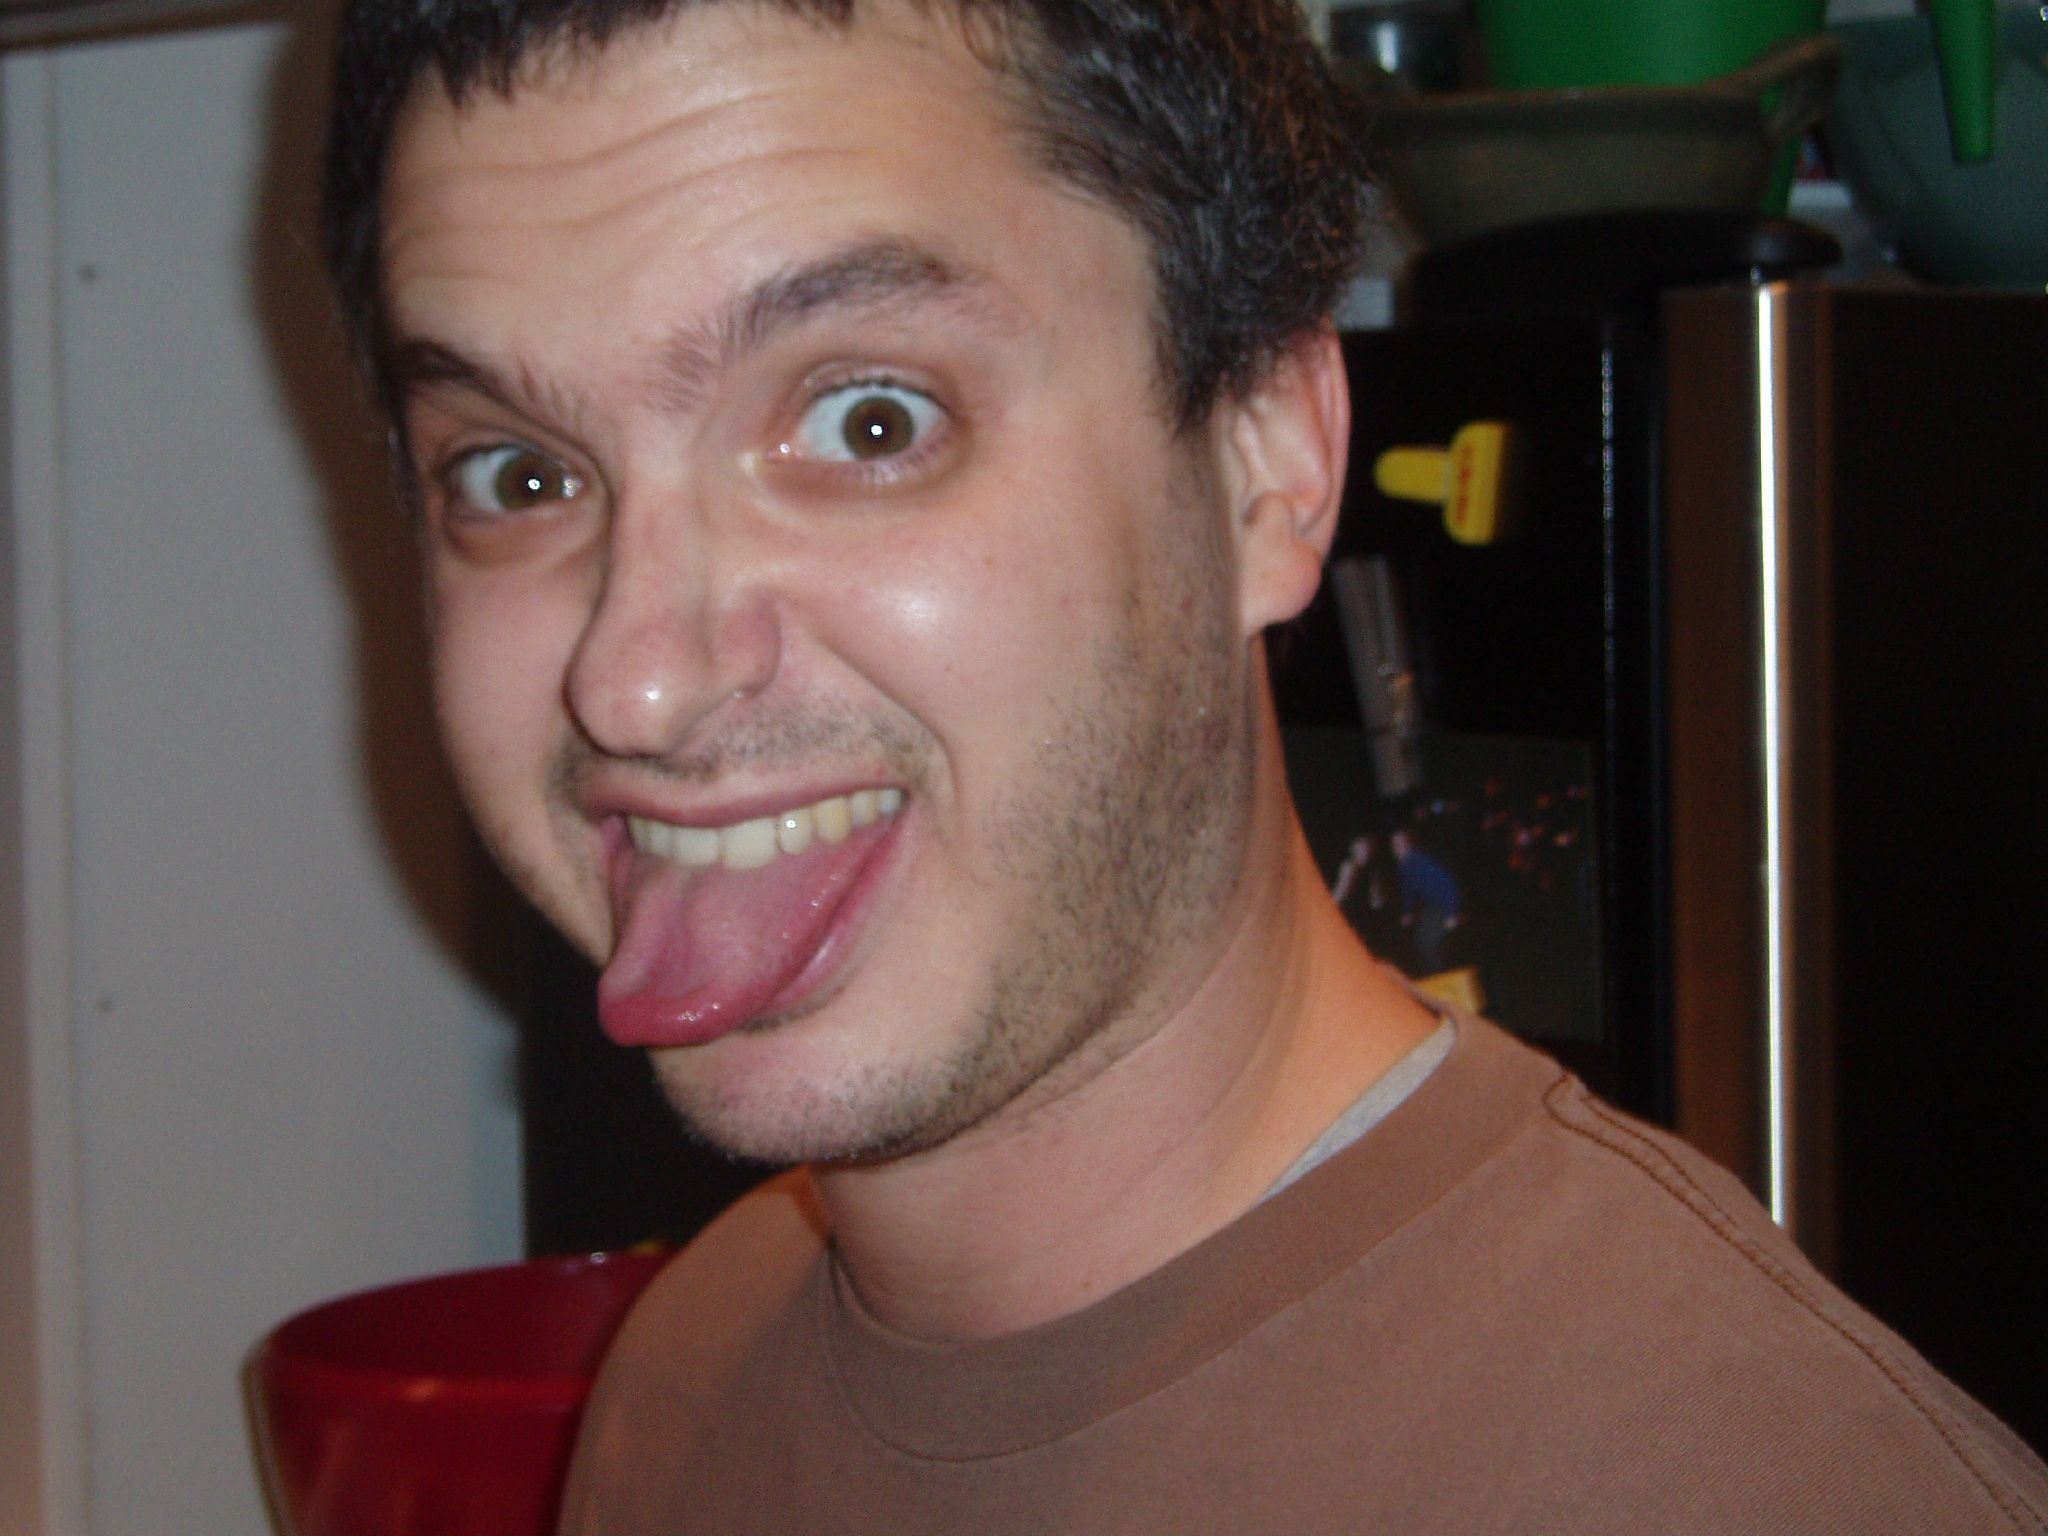 a young man sticking his tongue out with no teeth